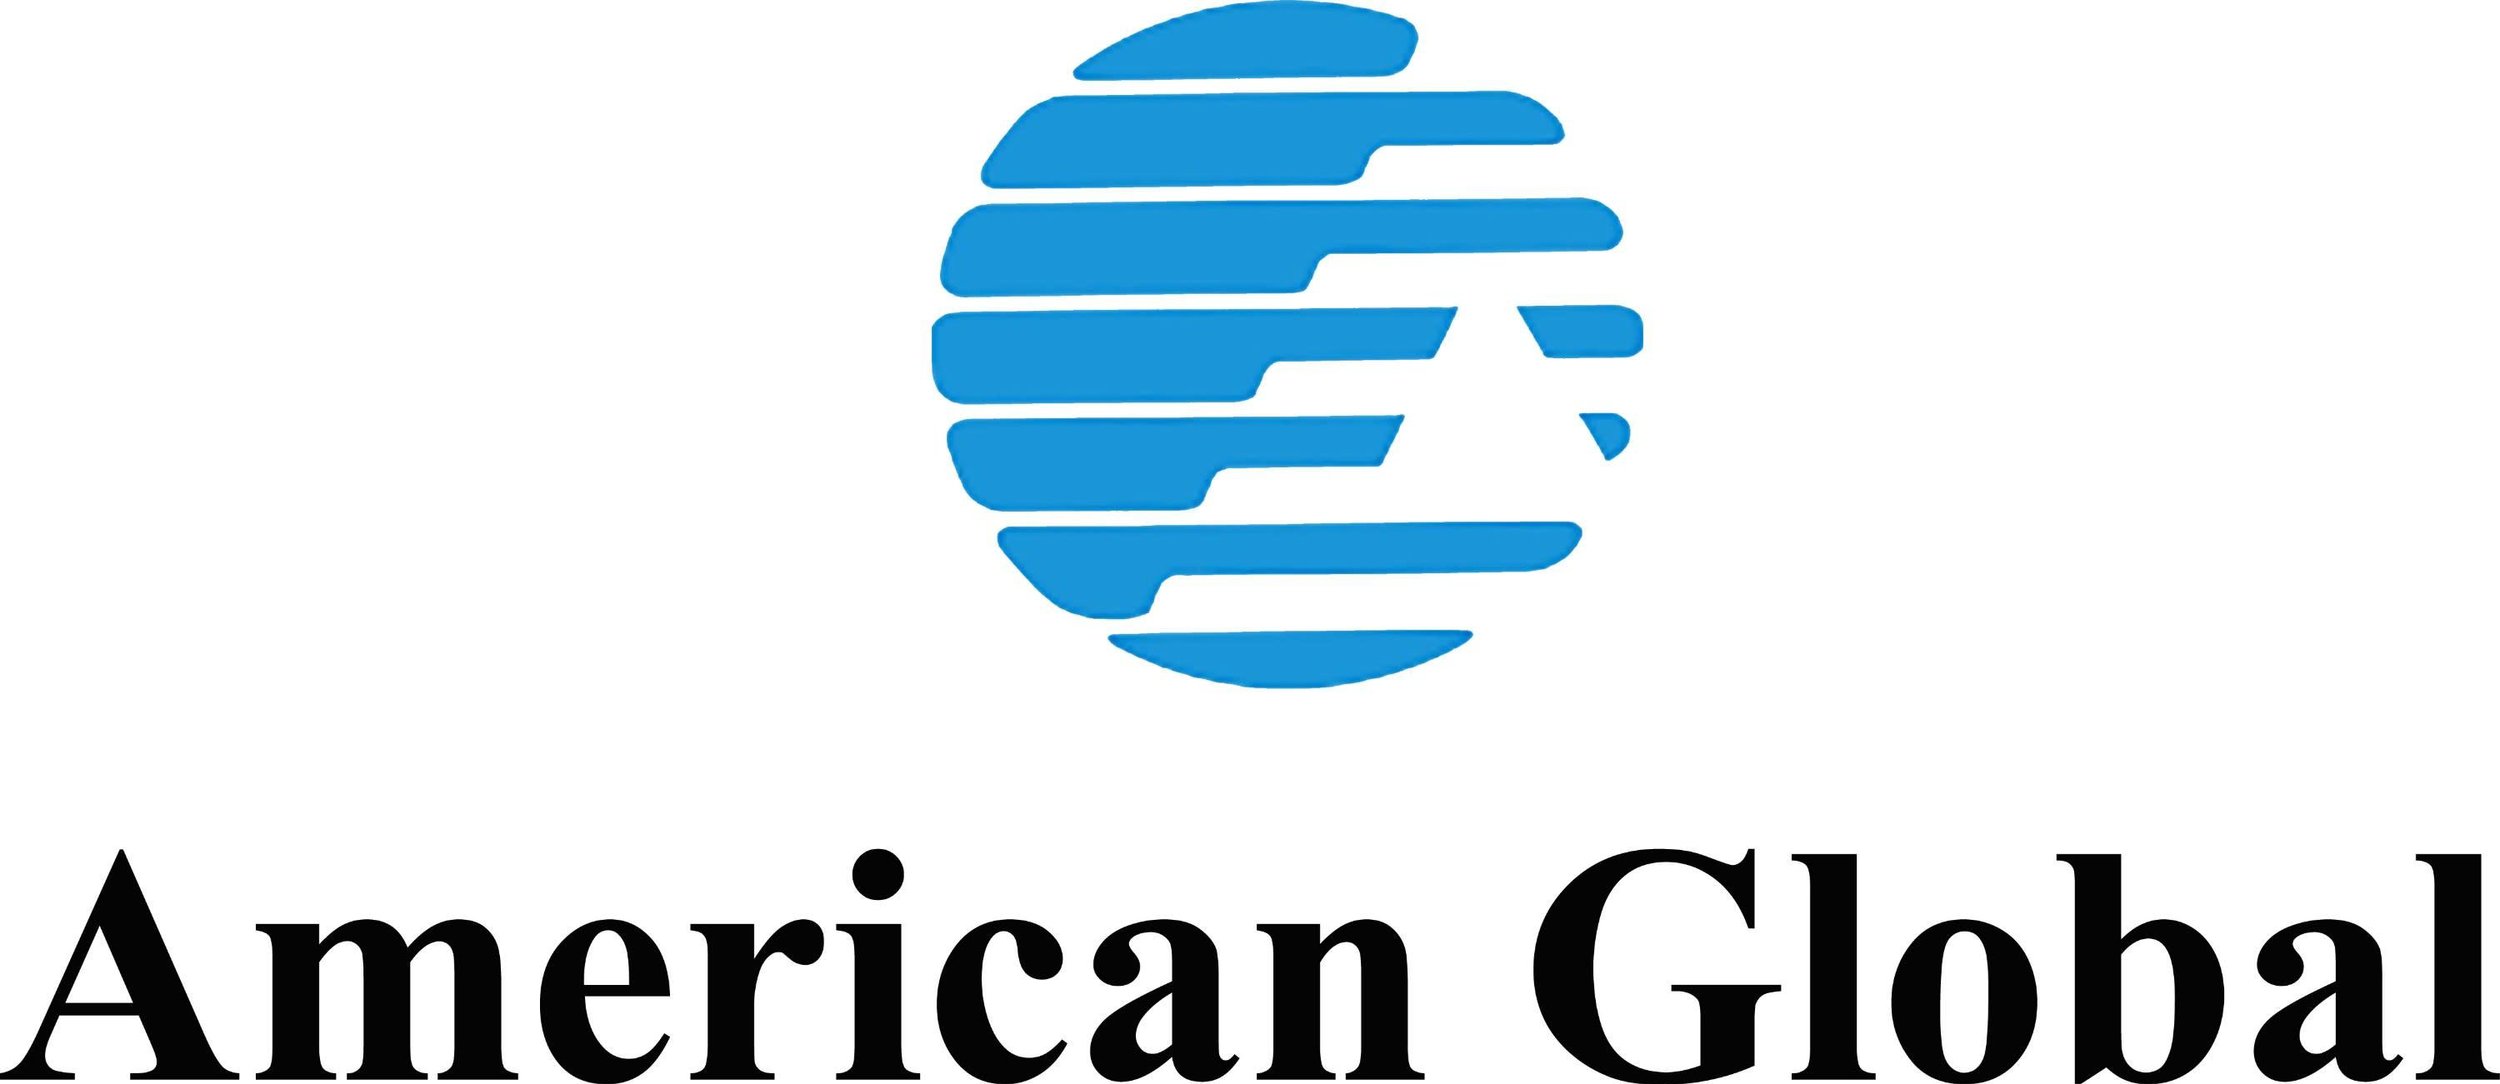 American-Global-Logo-and-Lettering.jpeg